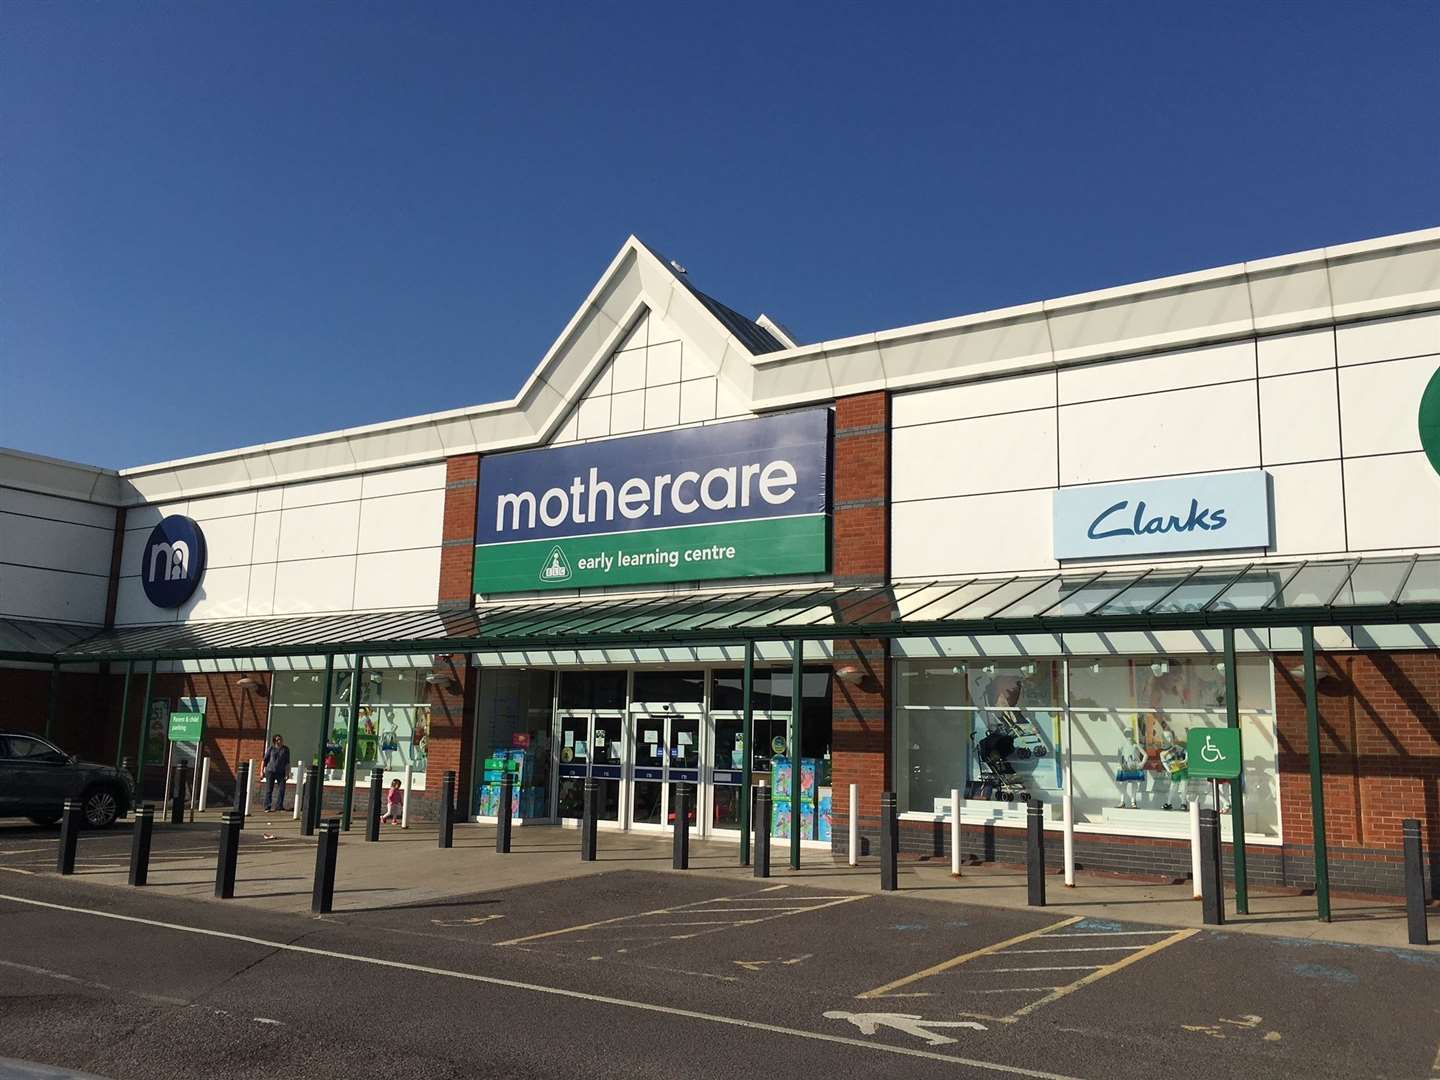 Mothercare in Canterbury is under threat